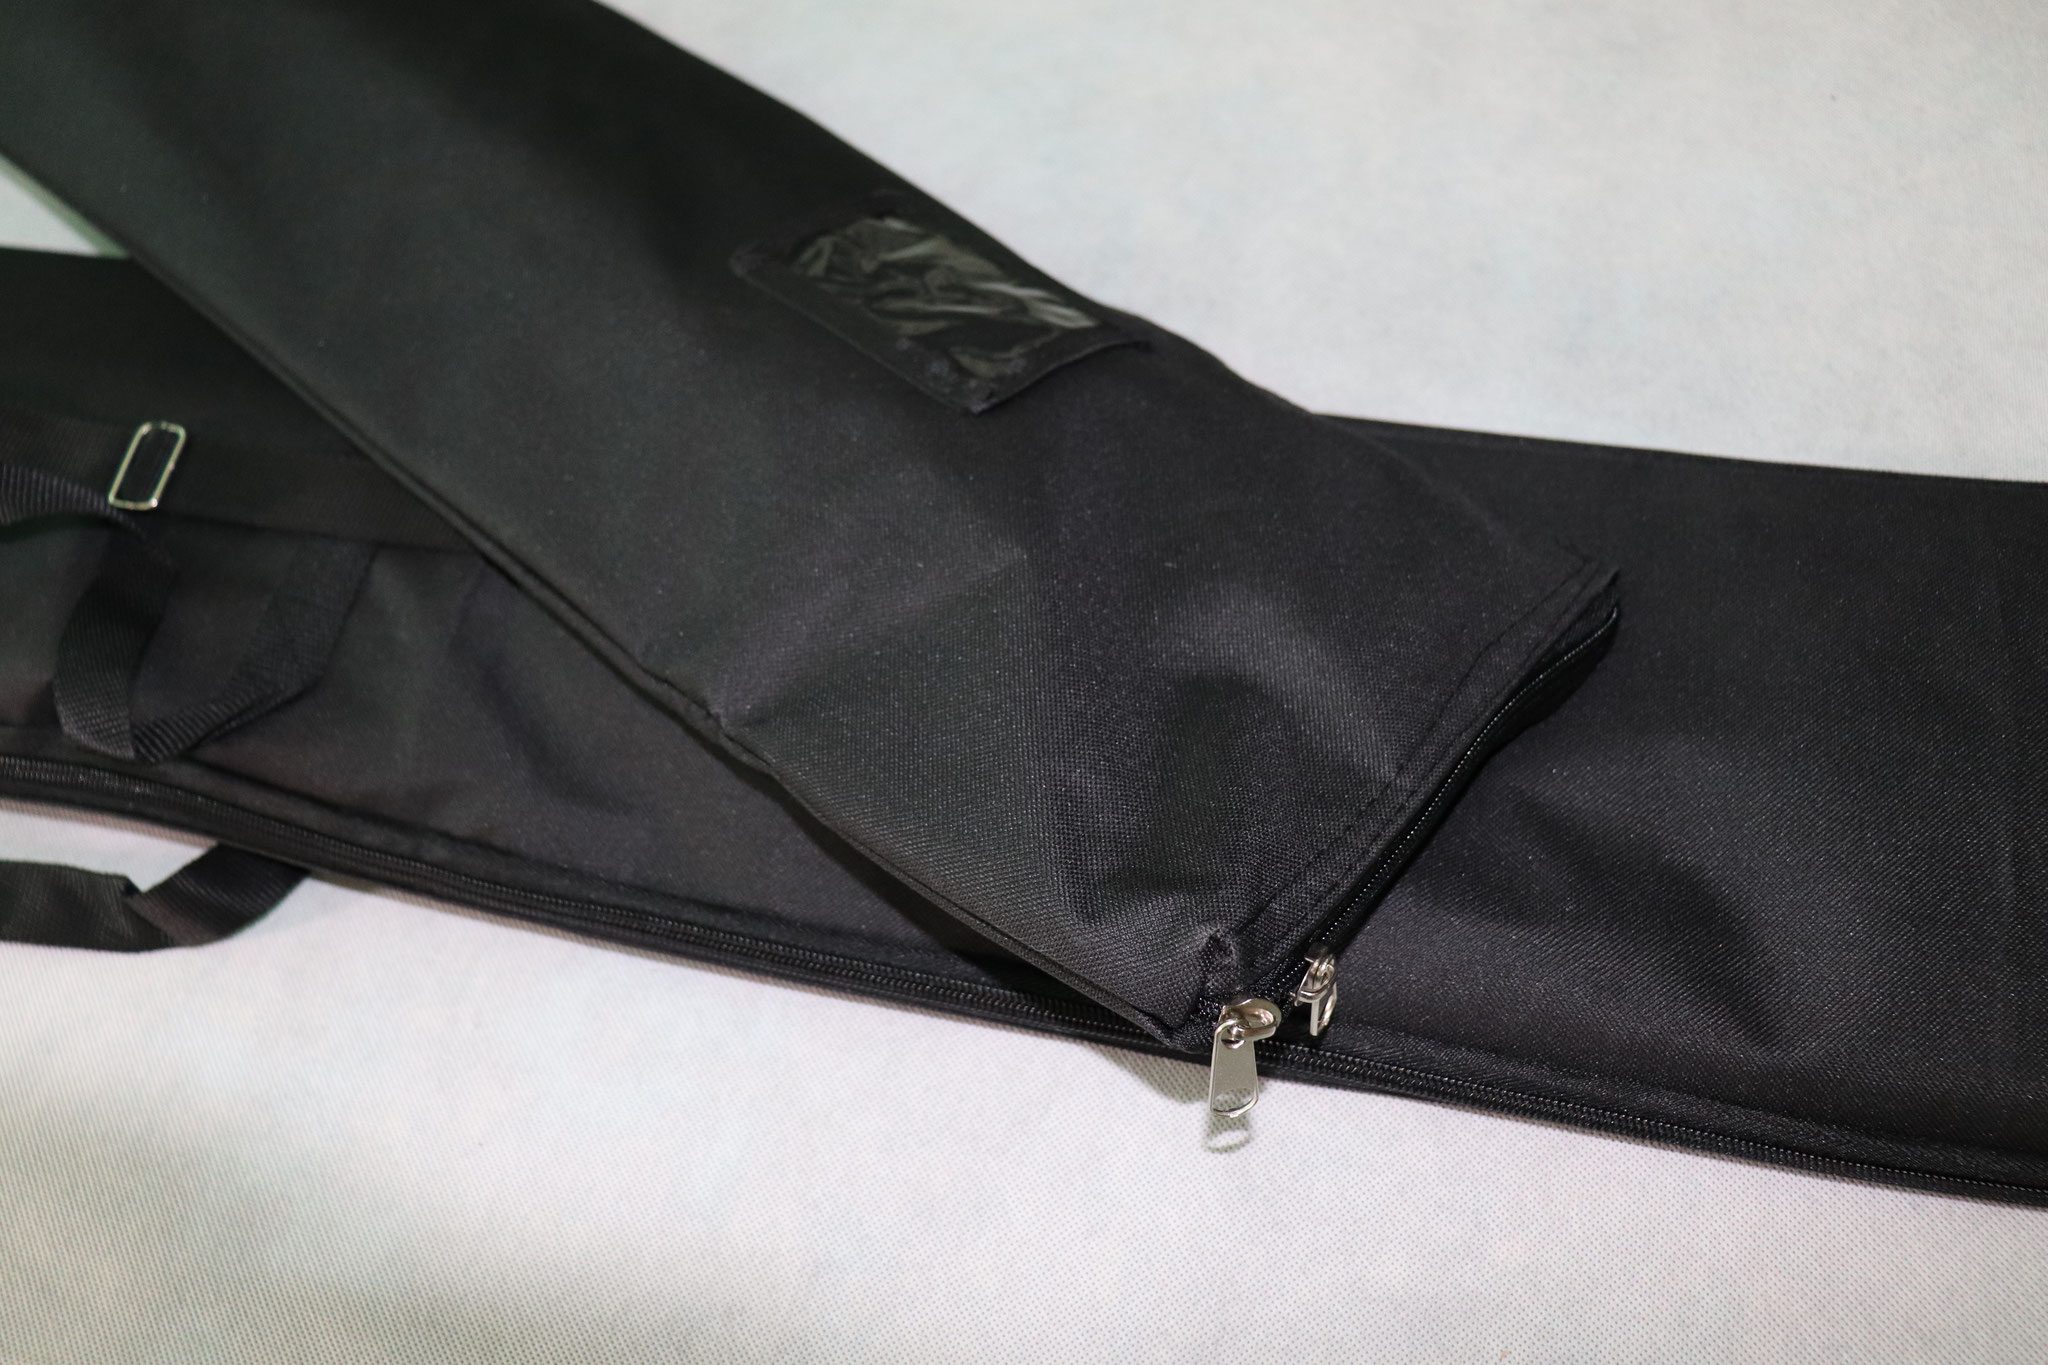 Fibrelight Printed Feather Flags - Double Zip & ID Pocket Bags